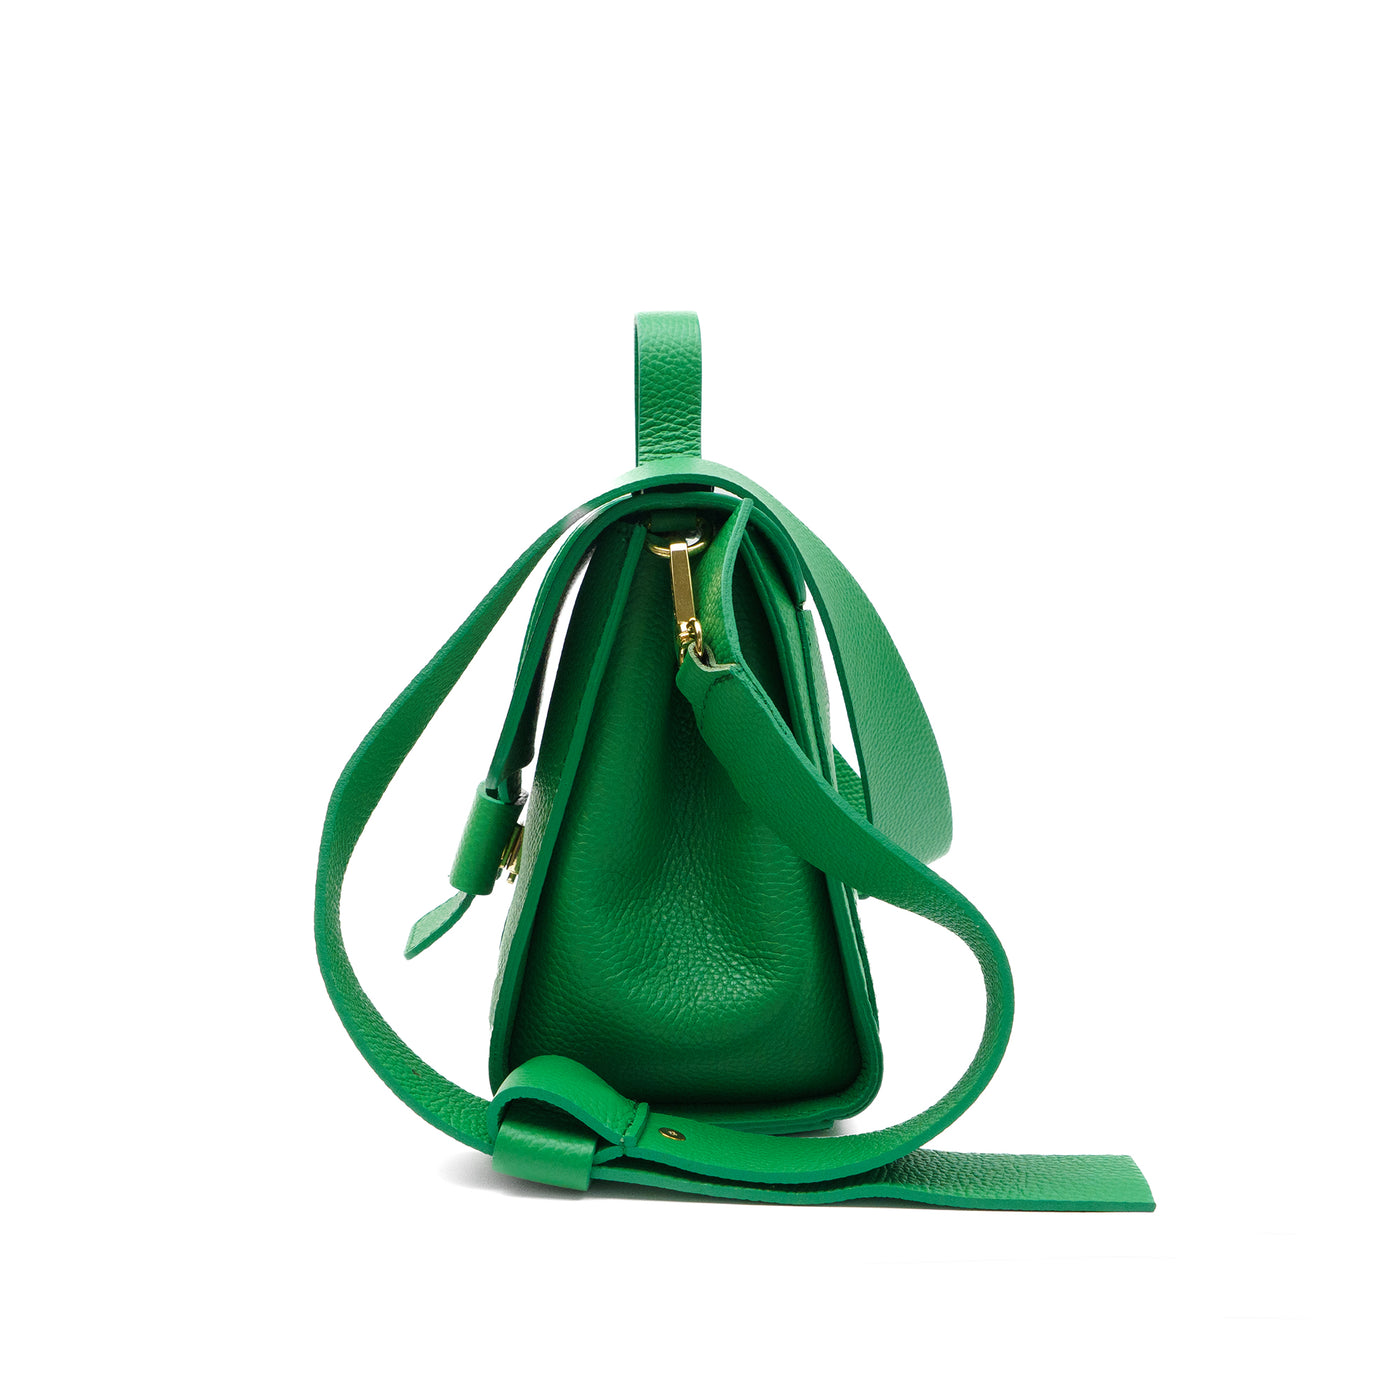 Leather bag "Parma" Green